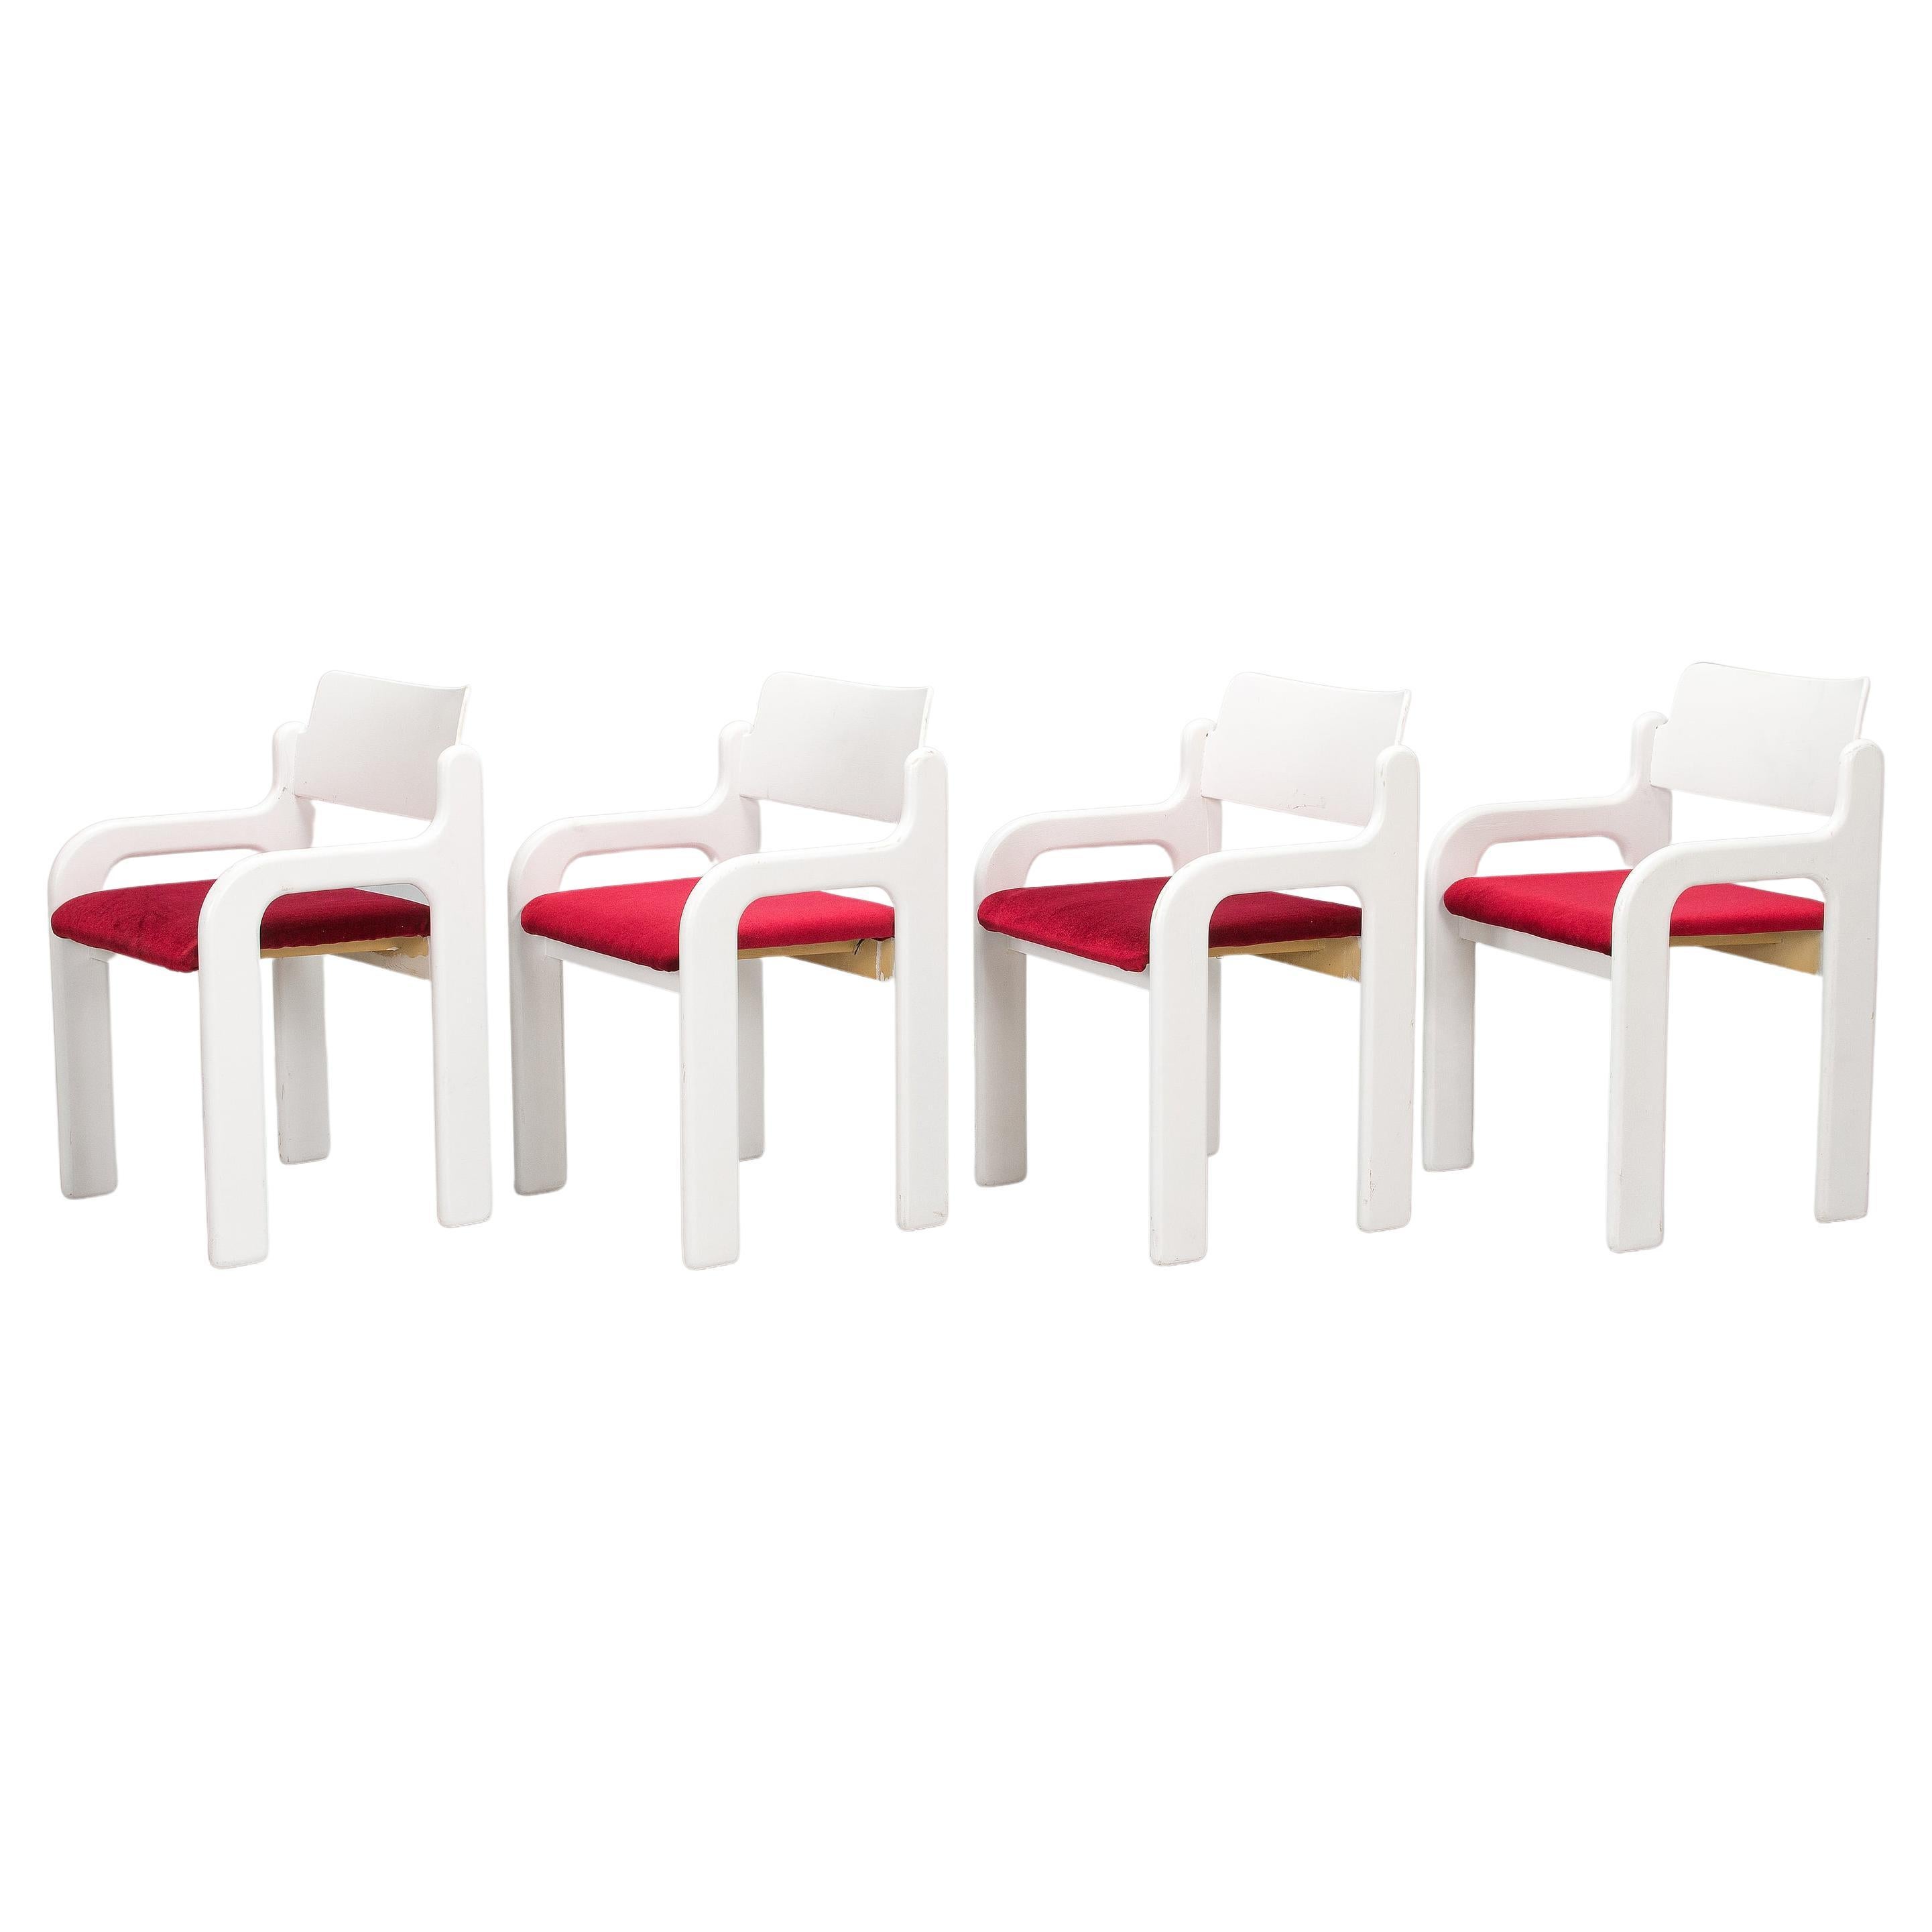 Eero Aarnio Dining chairs 'Flamingo' for Asko  set of 4 Finland 1970s For Sale